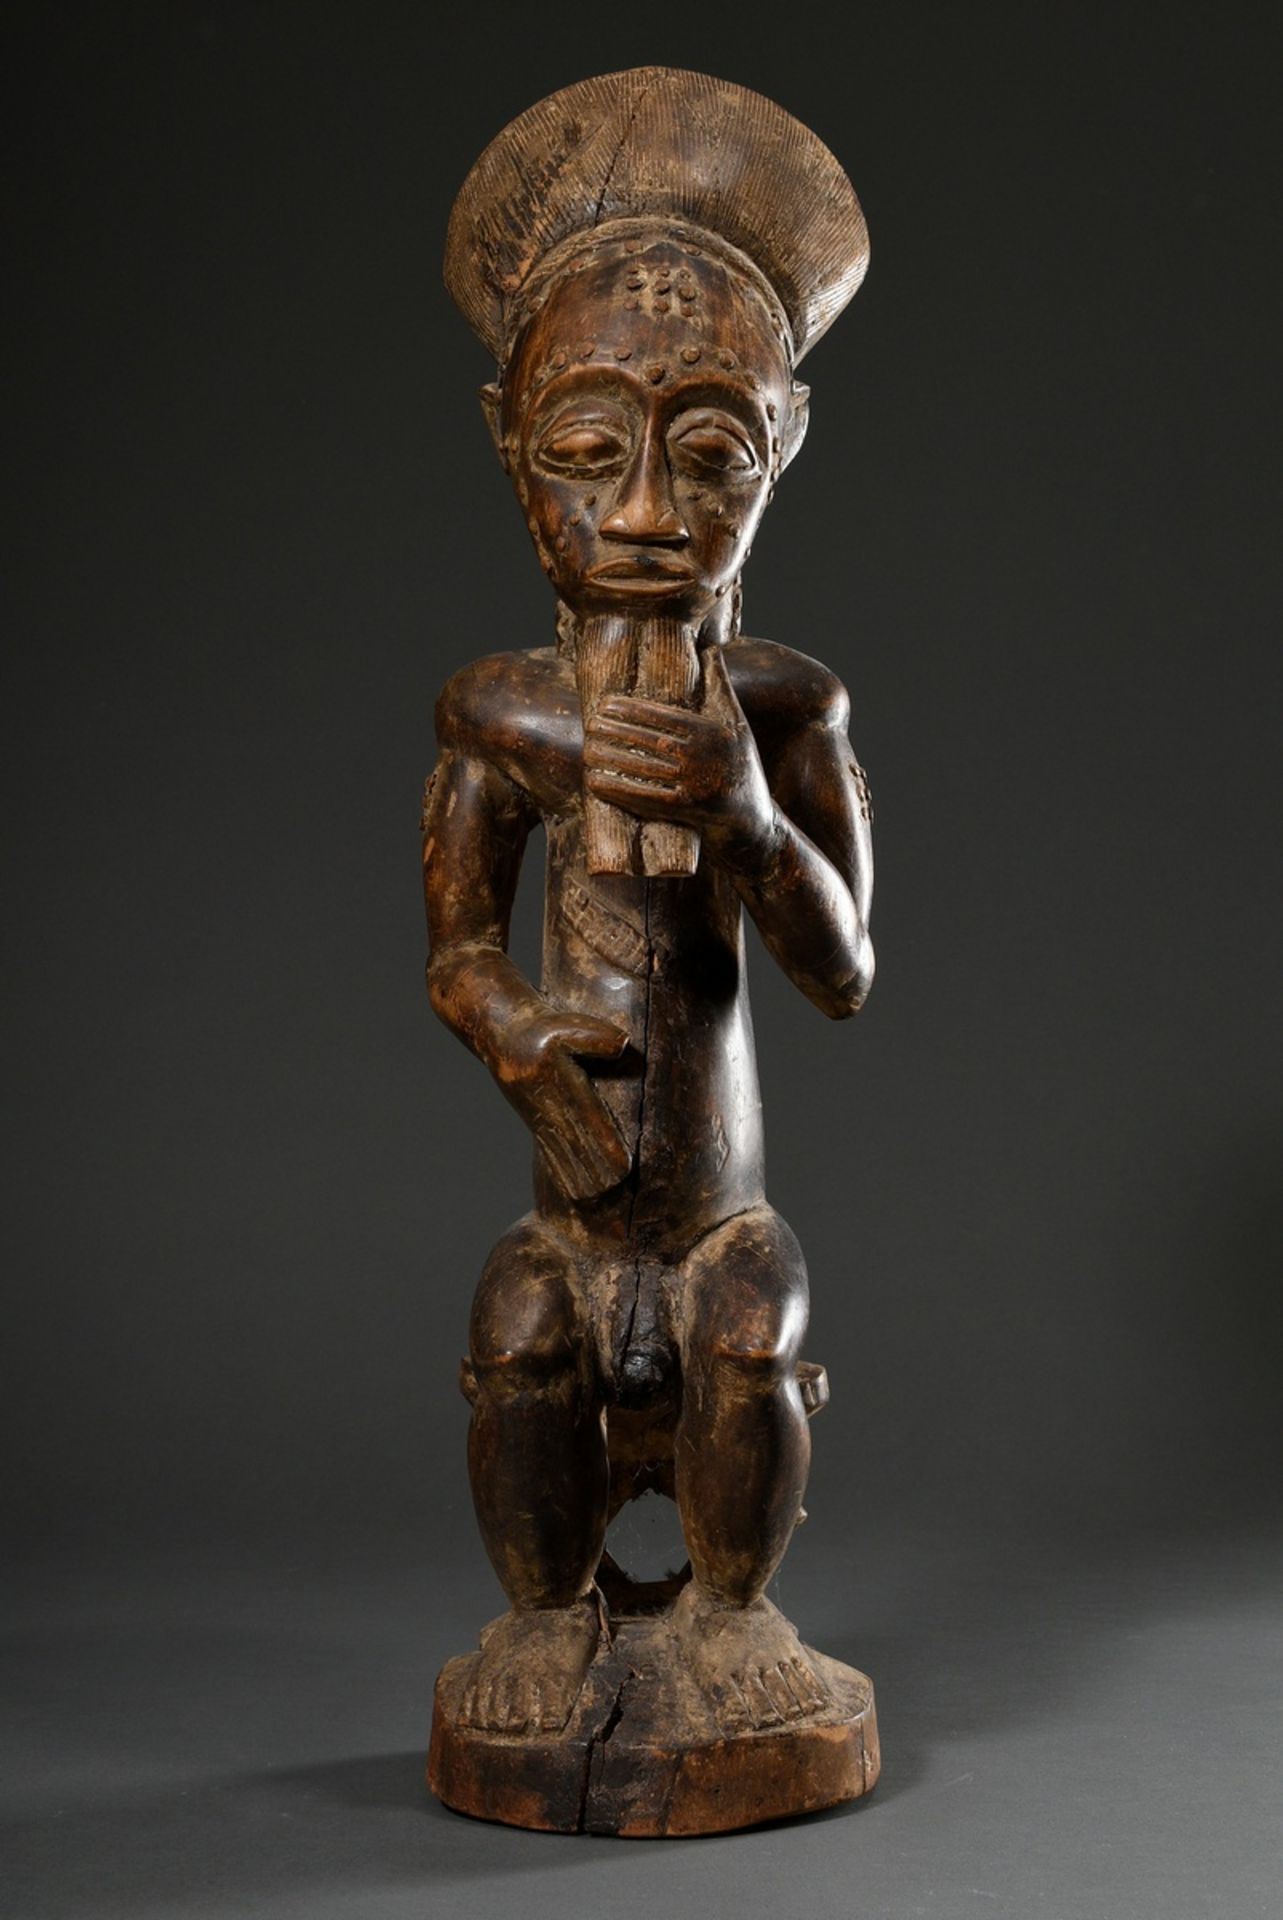 Male African ancestor figure "Blolo bian" with scarifications, carved wood with remains of old pati - Image 2 of 9